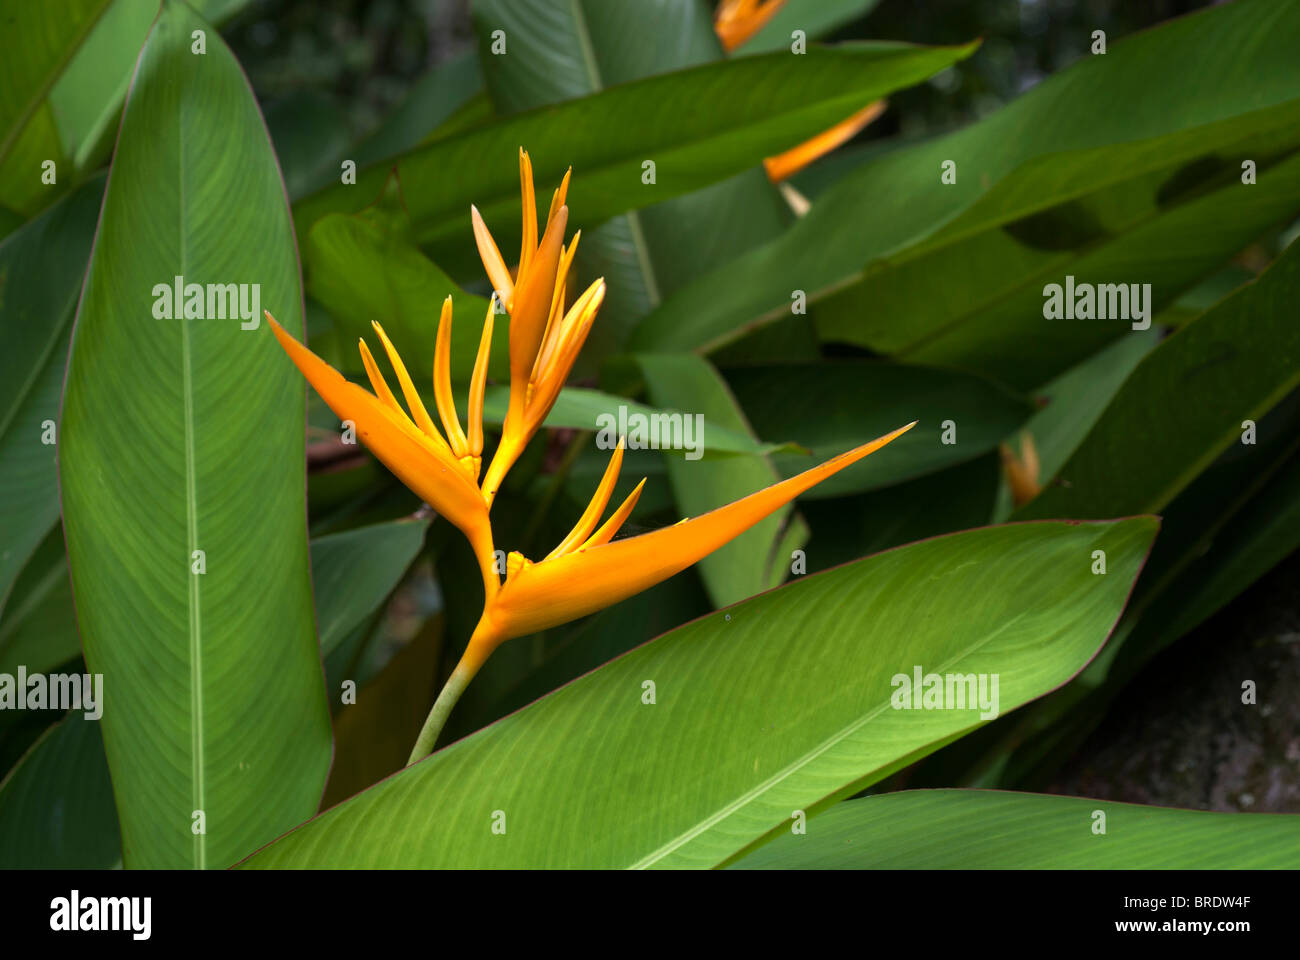 Heliconia flower known parrot flowers ; Kerala ; India Stock Photo